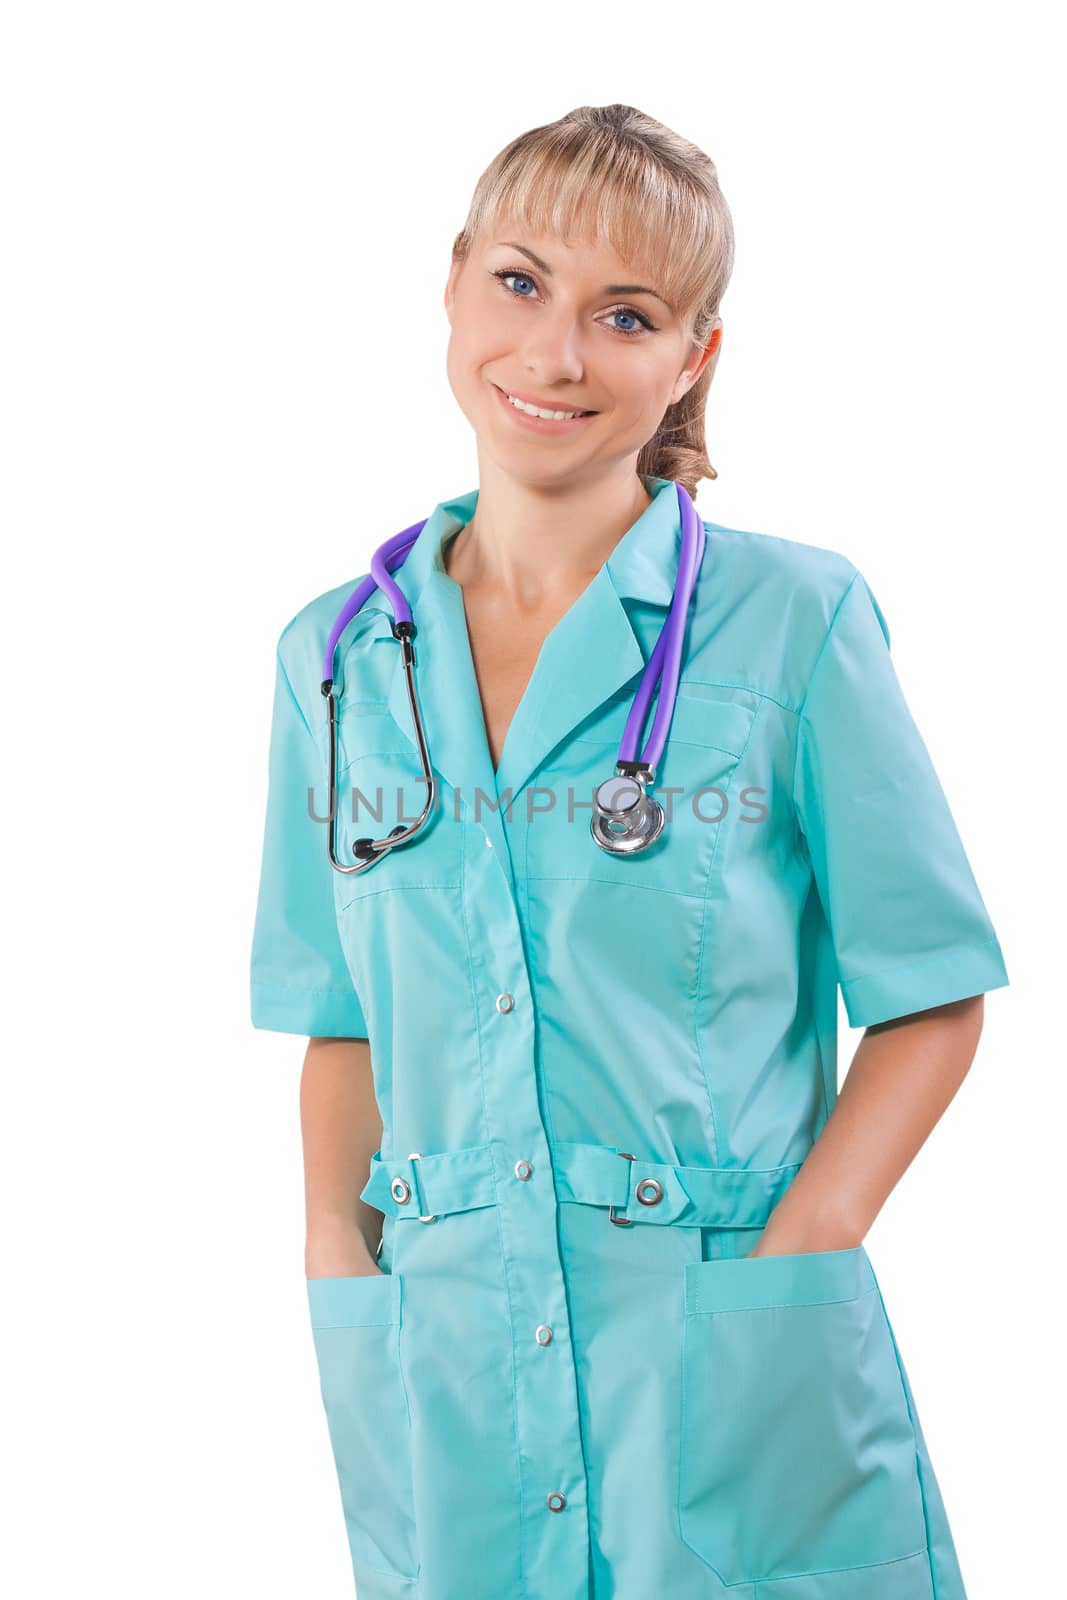 female doctor with hands in pockets smiling isolatyed by mihalec